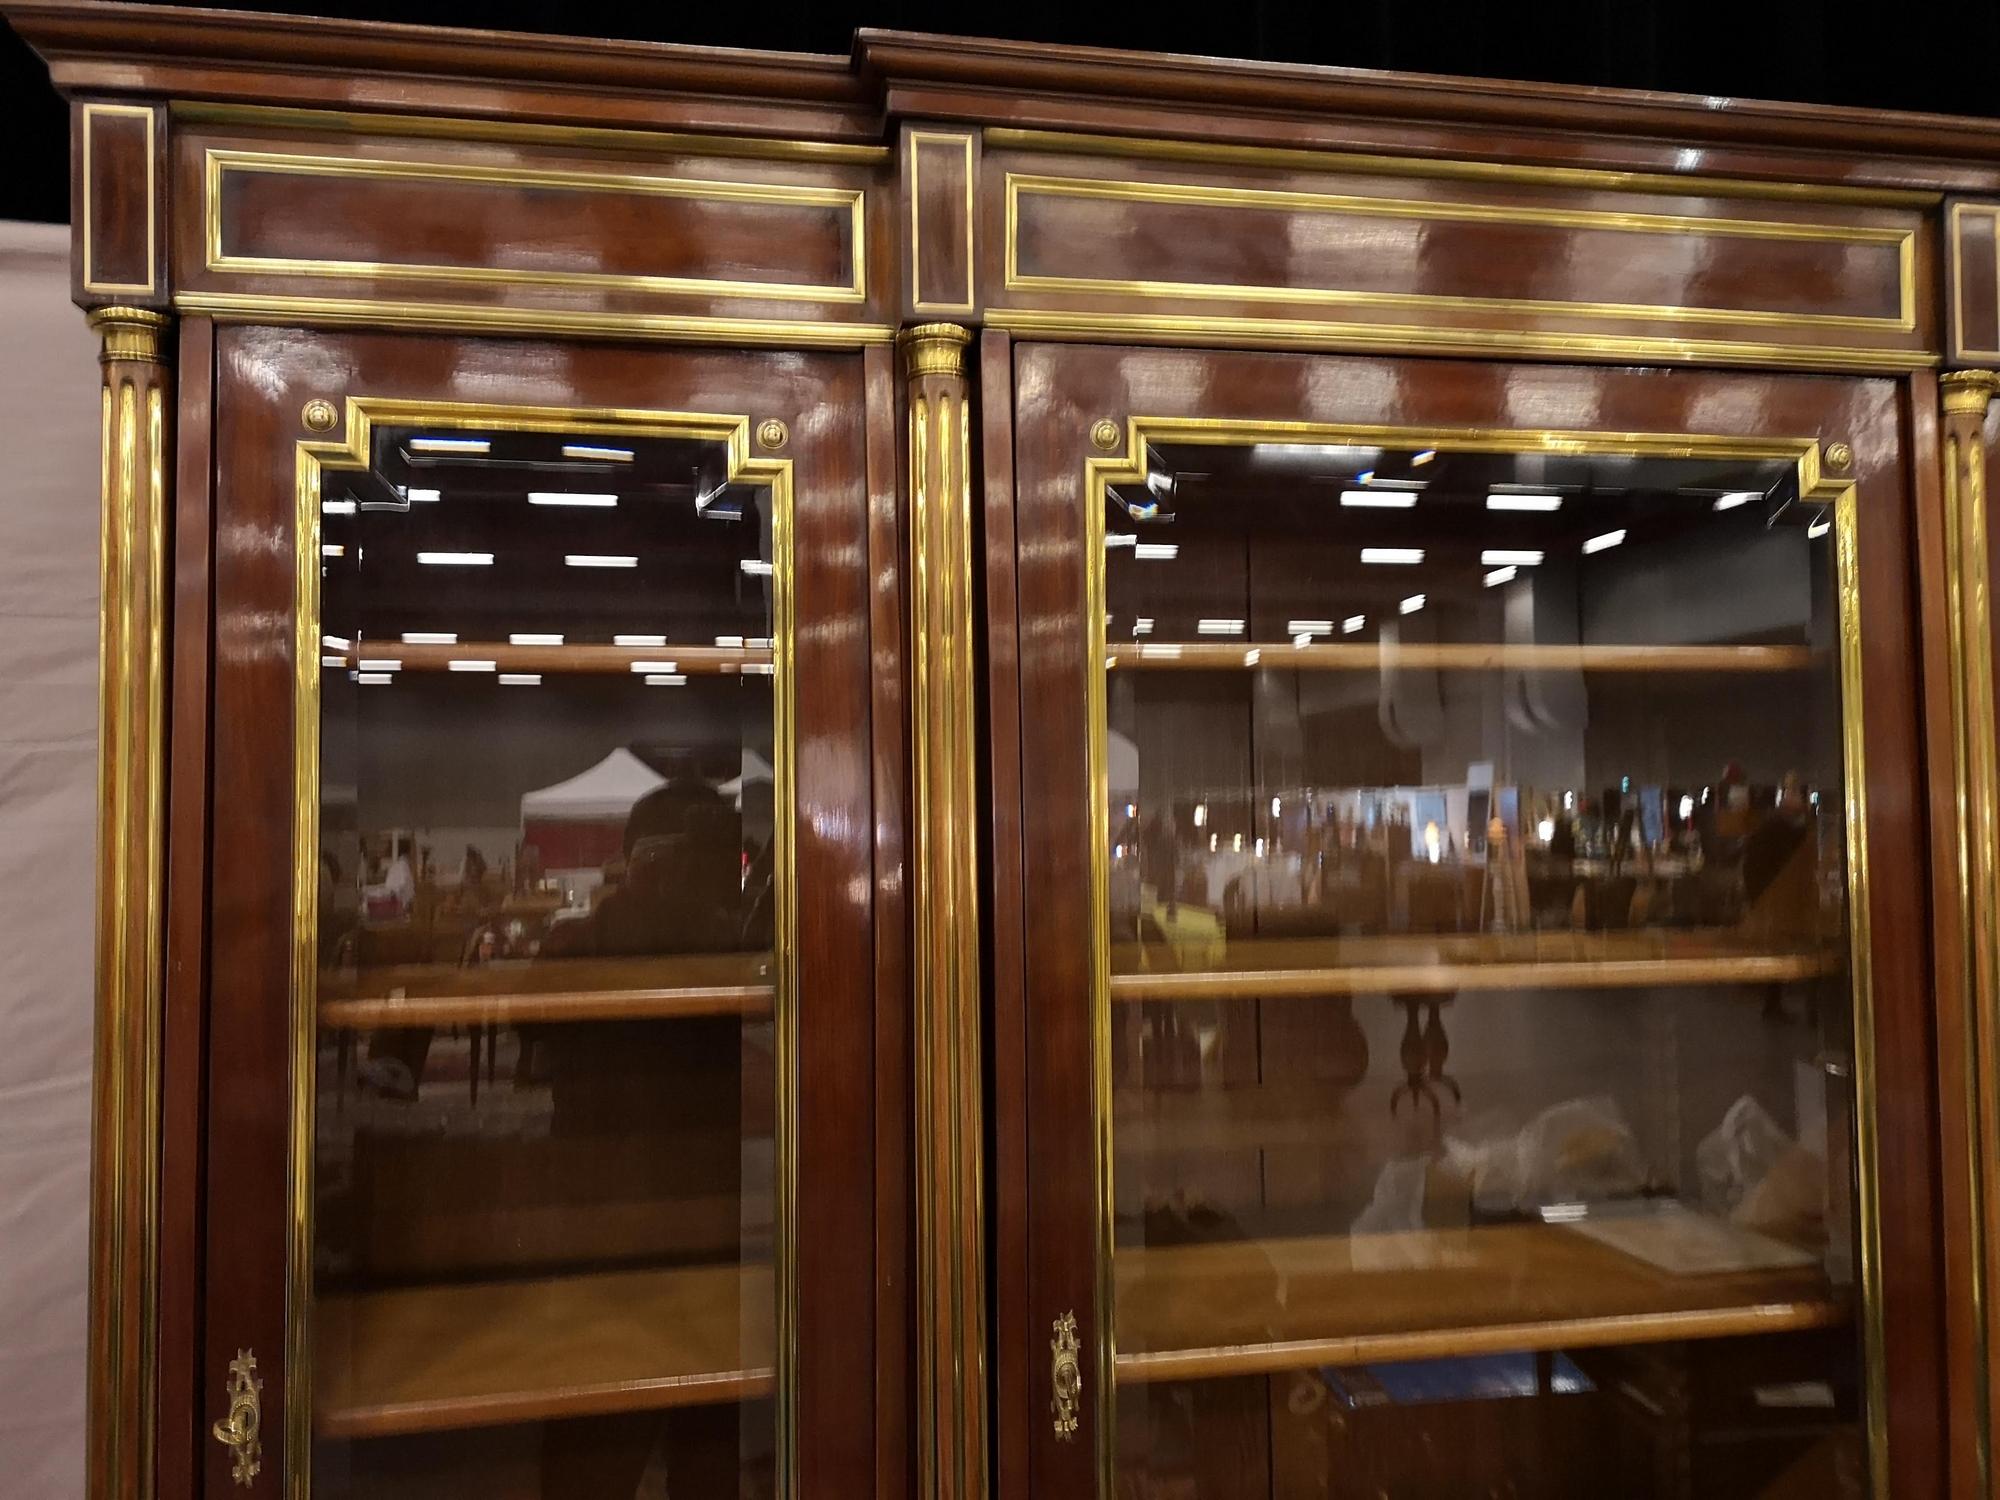 A mahogany bookcase, Circa XIX, from the Napoleon III period, Louis XVI style.
The three doors are bevelled glass and molded in brass, with their key.
The library is jutting out, the middle body is advanced.
The doors open onto significant